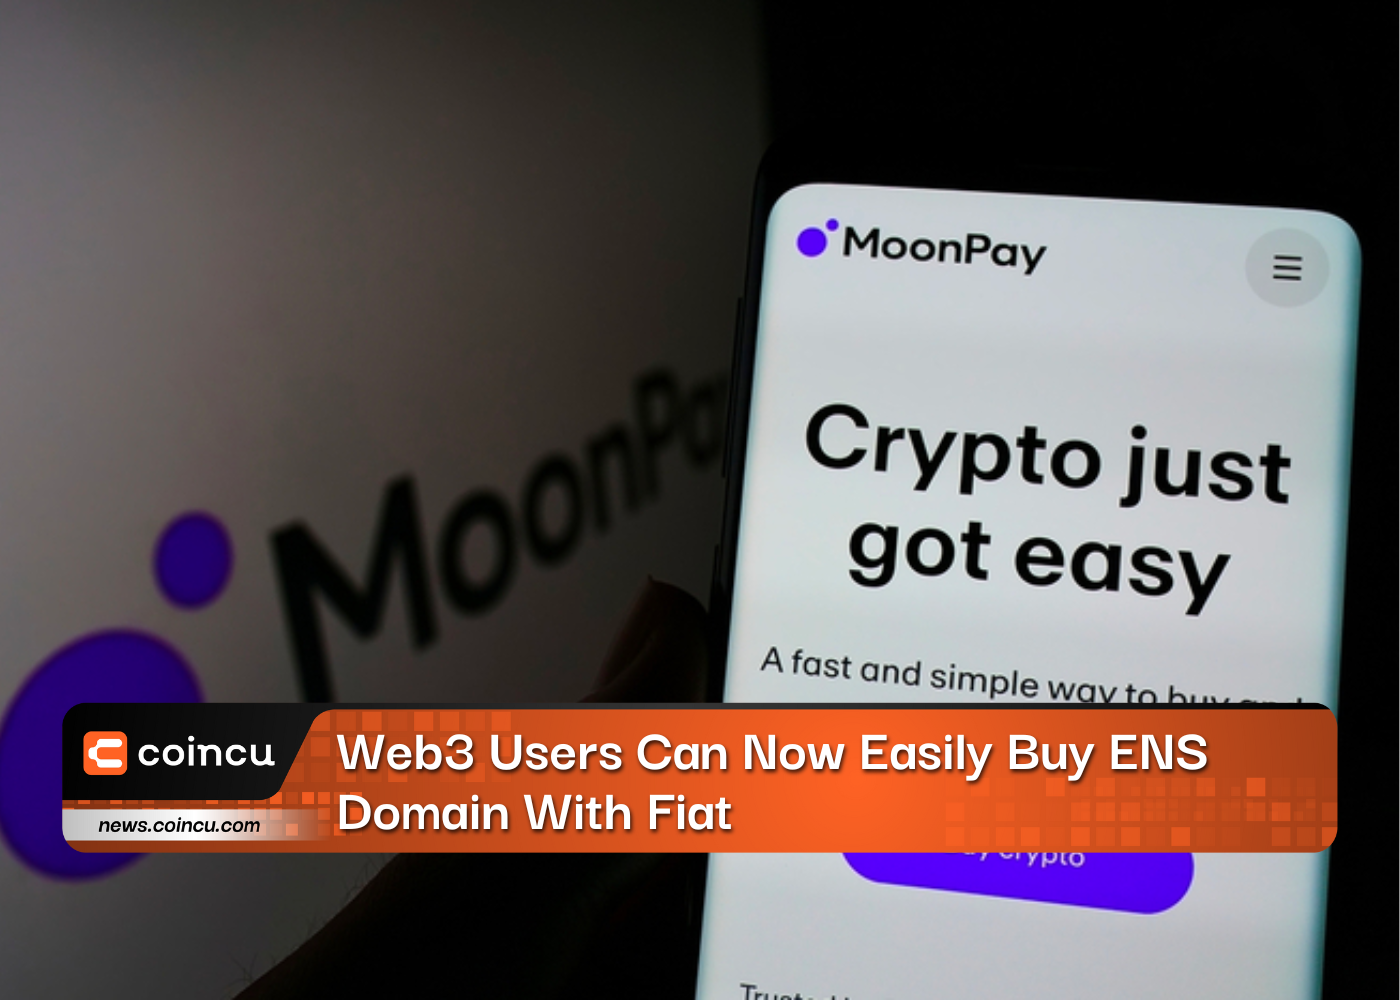 Web3 Users Can Now Easily Buy ENS Domain With Fiat